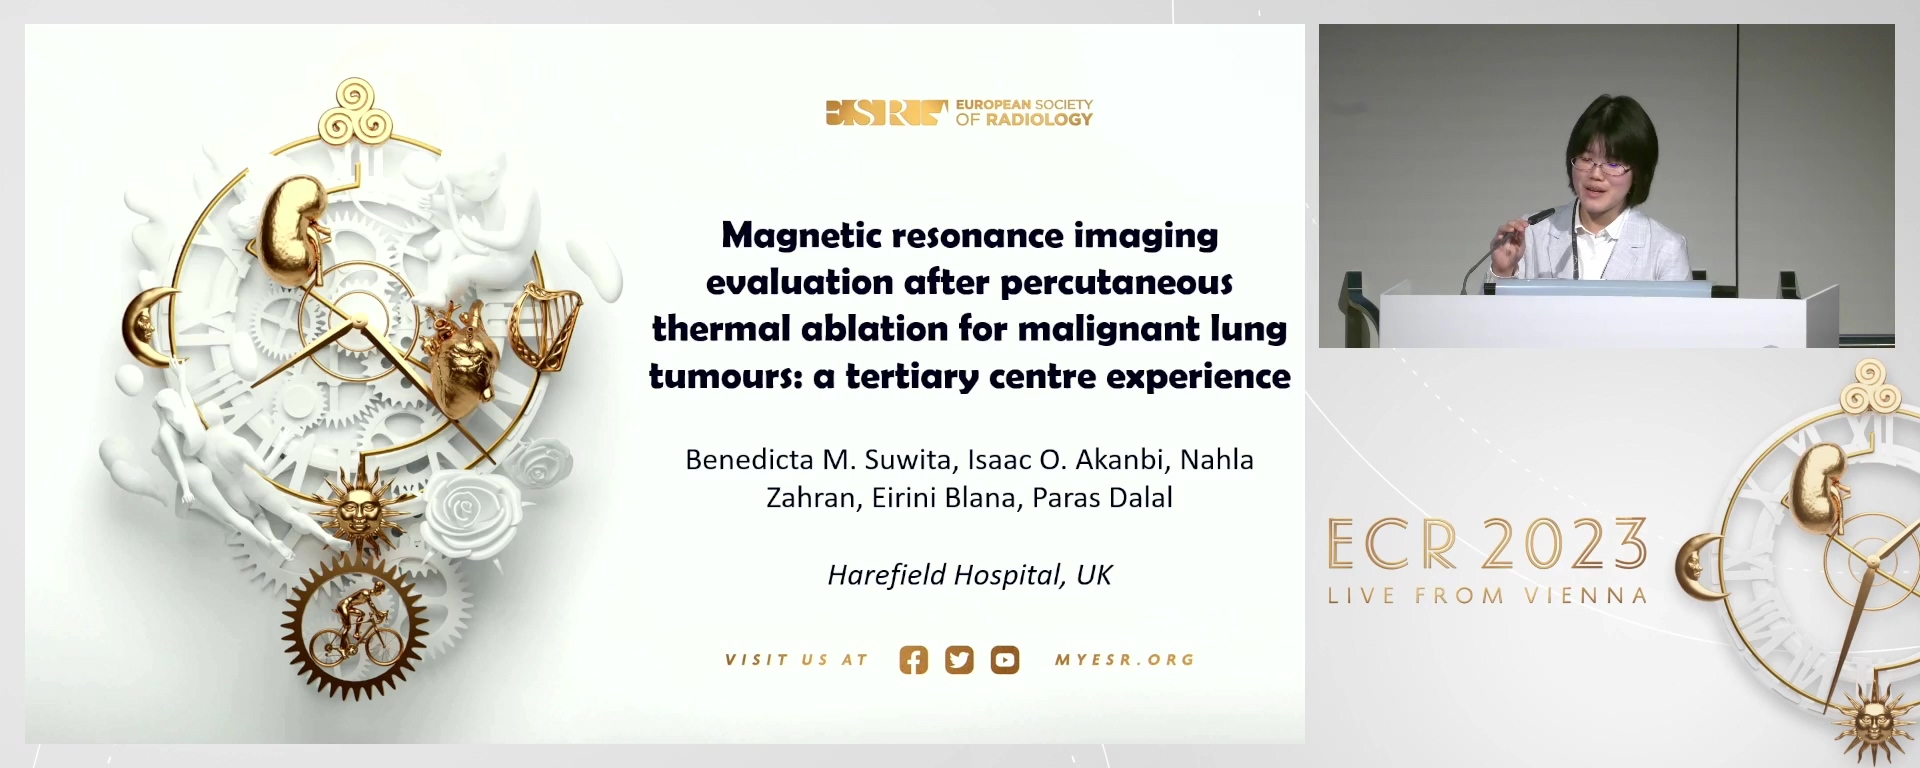 Magnetic resonance imaging evaluation after percutaneous thermal ablation for malignant lung tumours: a tertiary centre experience